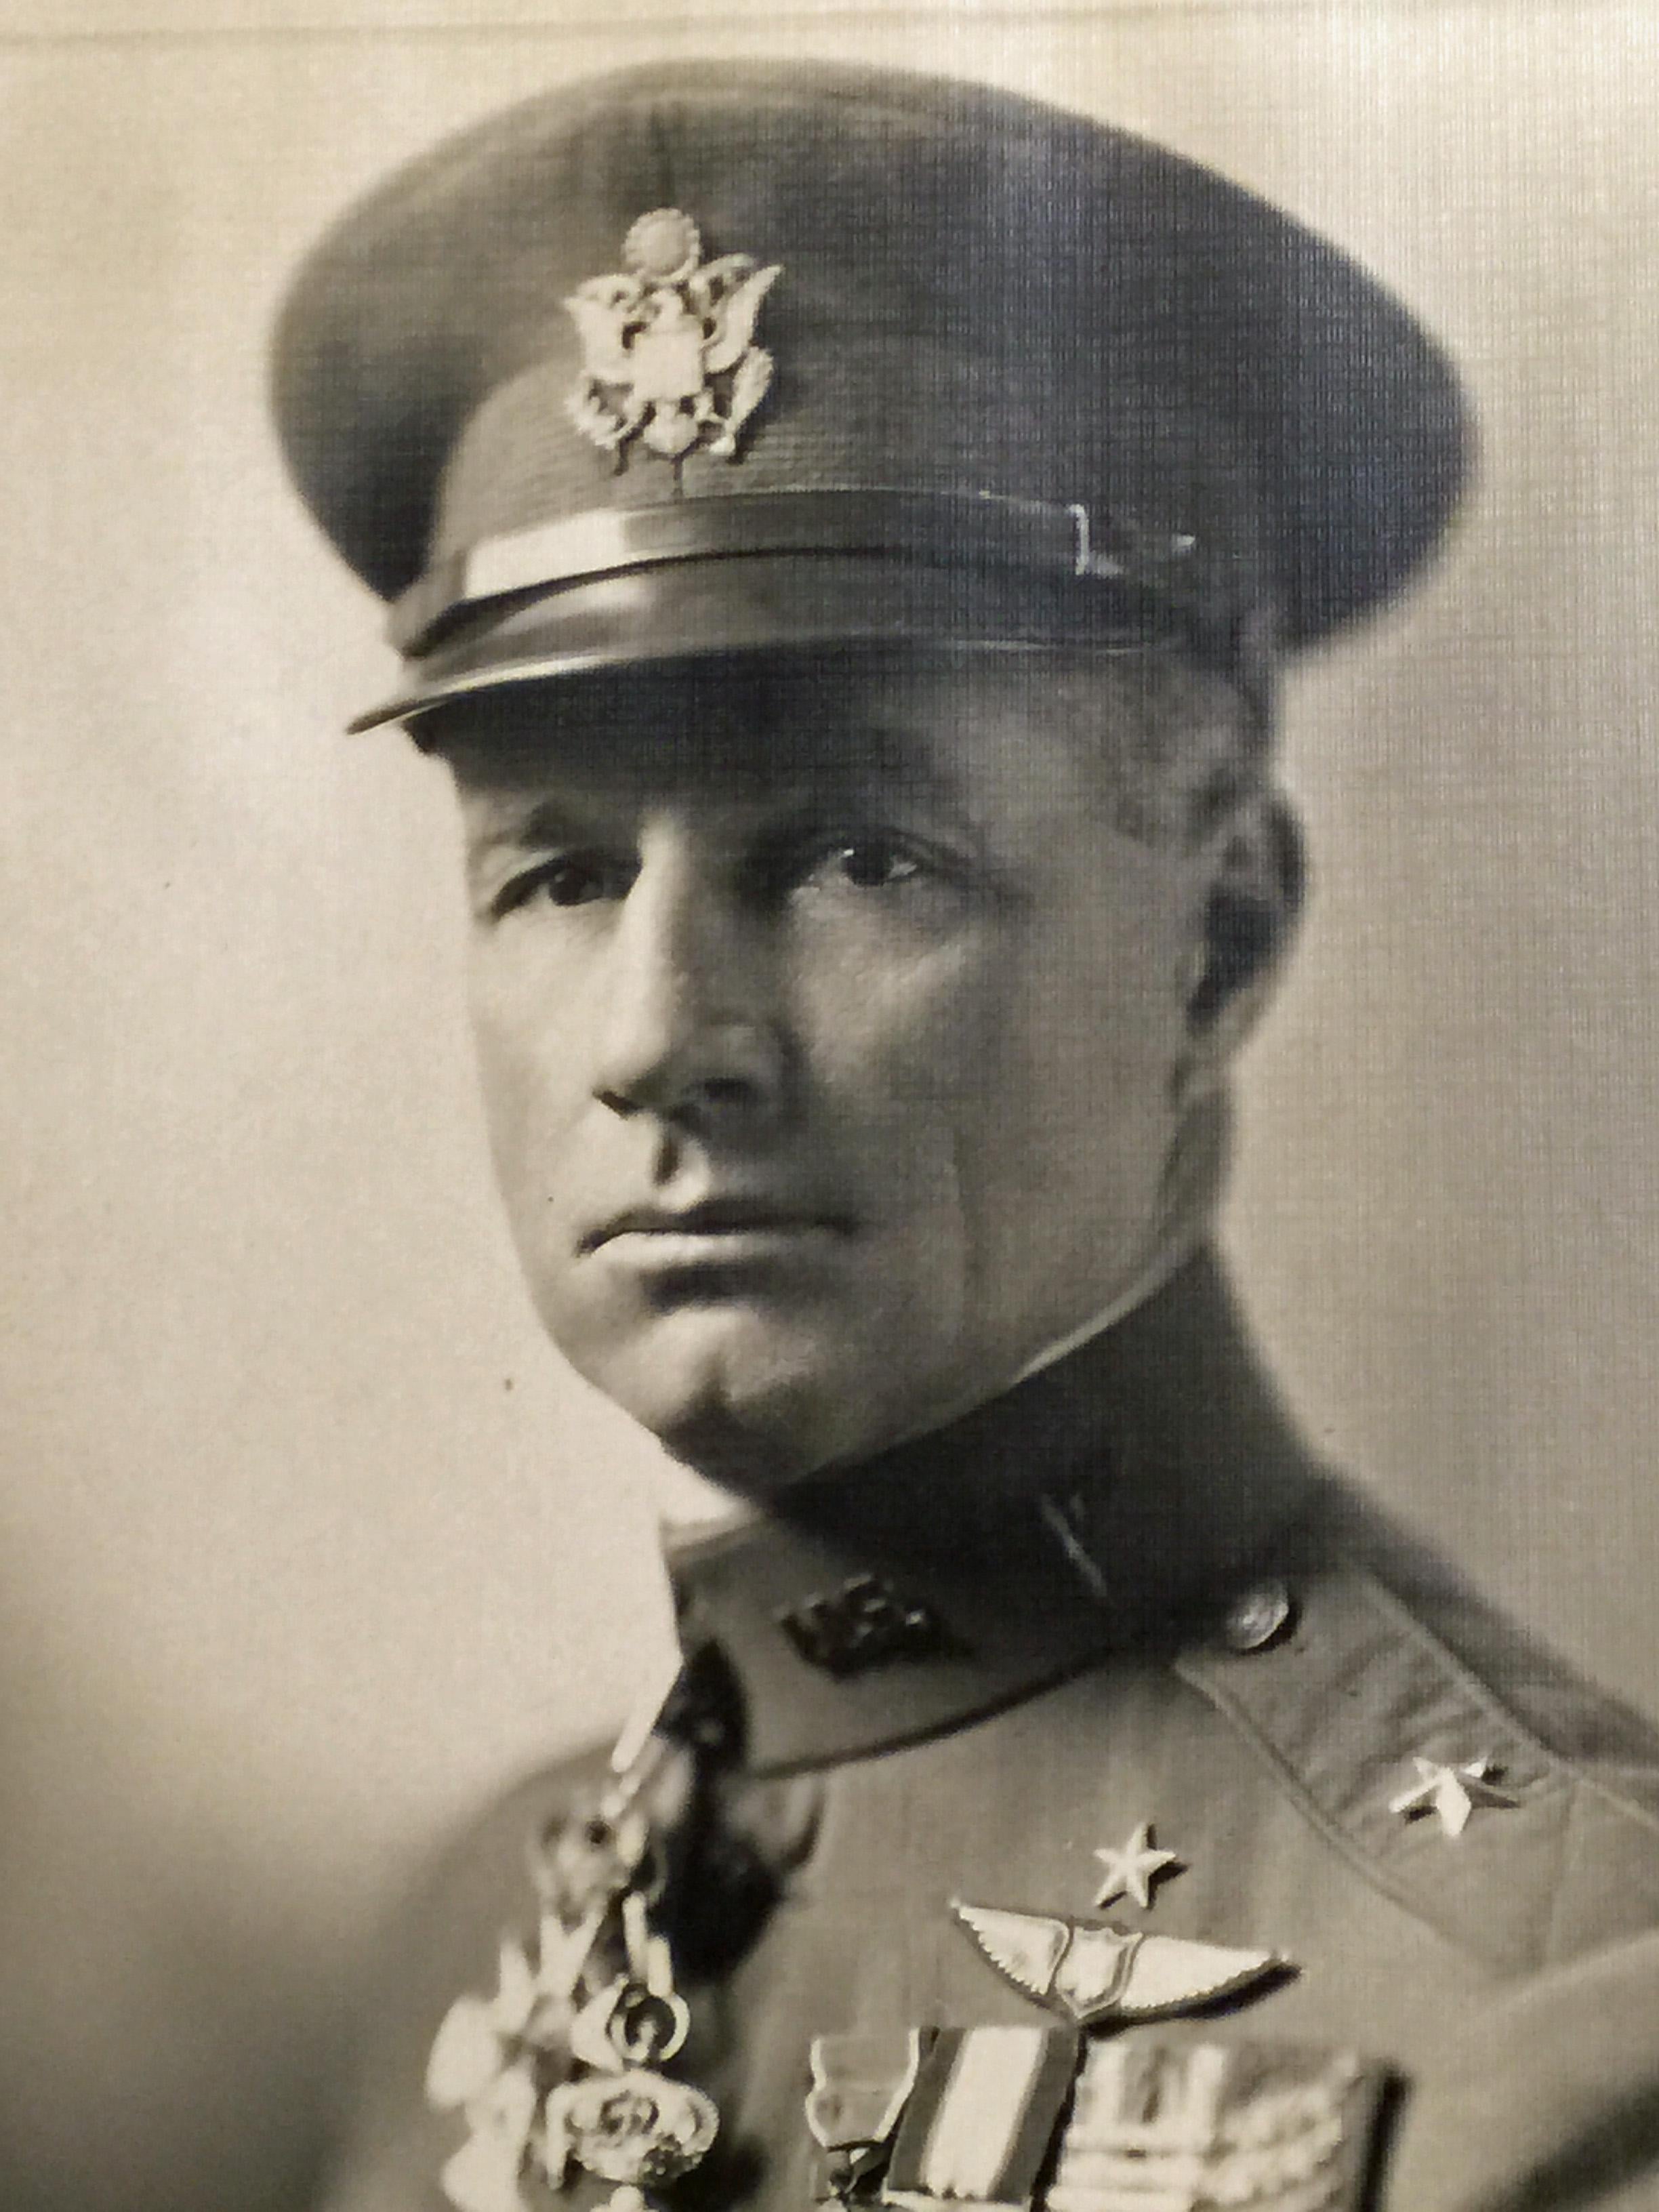 GENERAL BILLY MITCHELL - SIGNED AND INSCRIBED PHOTO DATED JANUARY, 1926